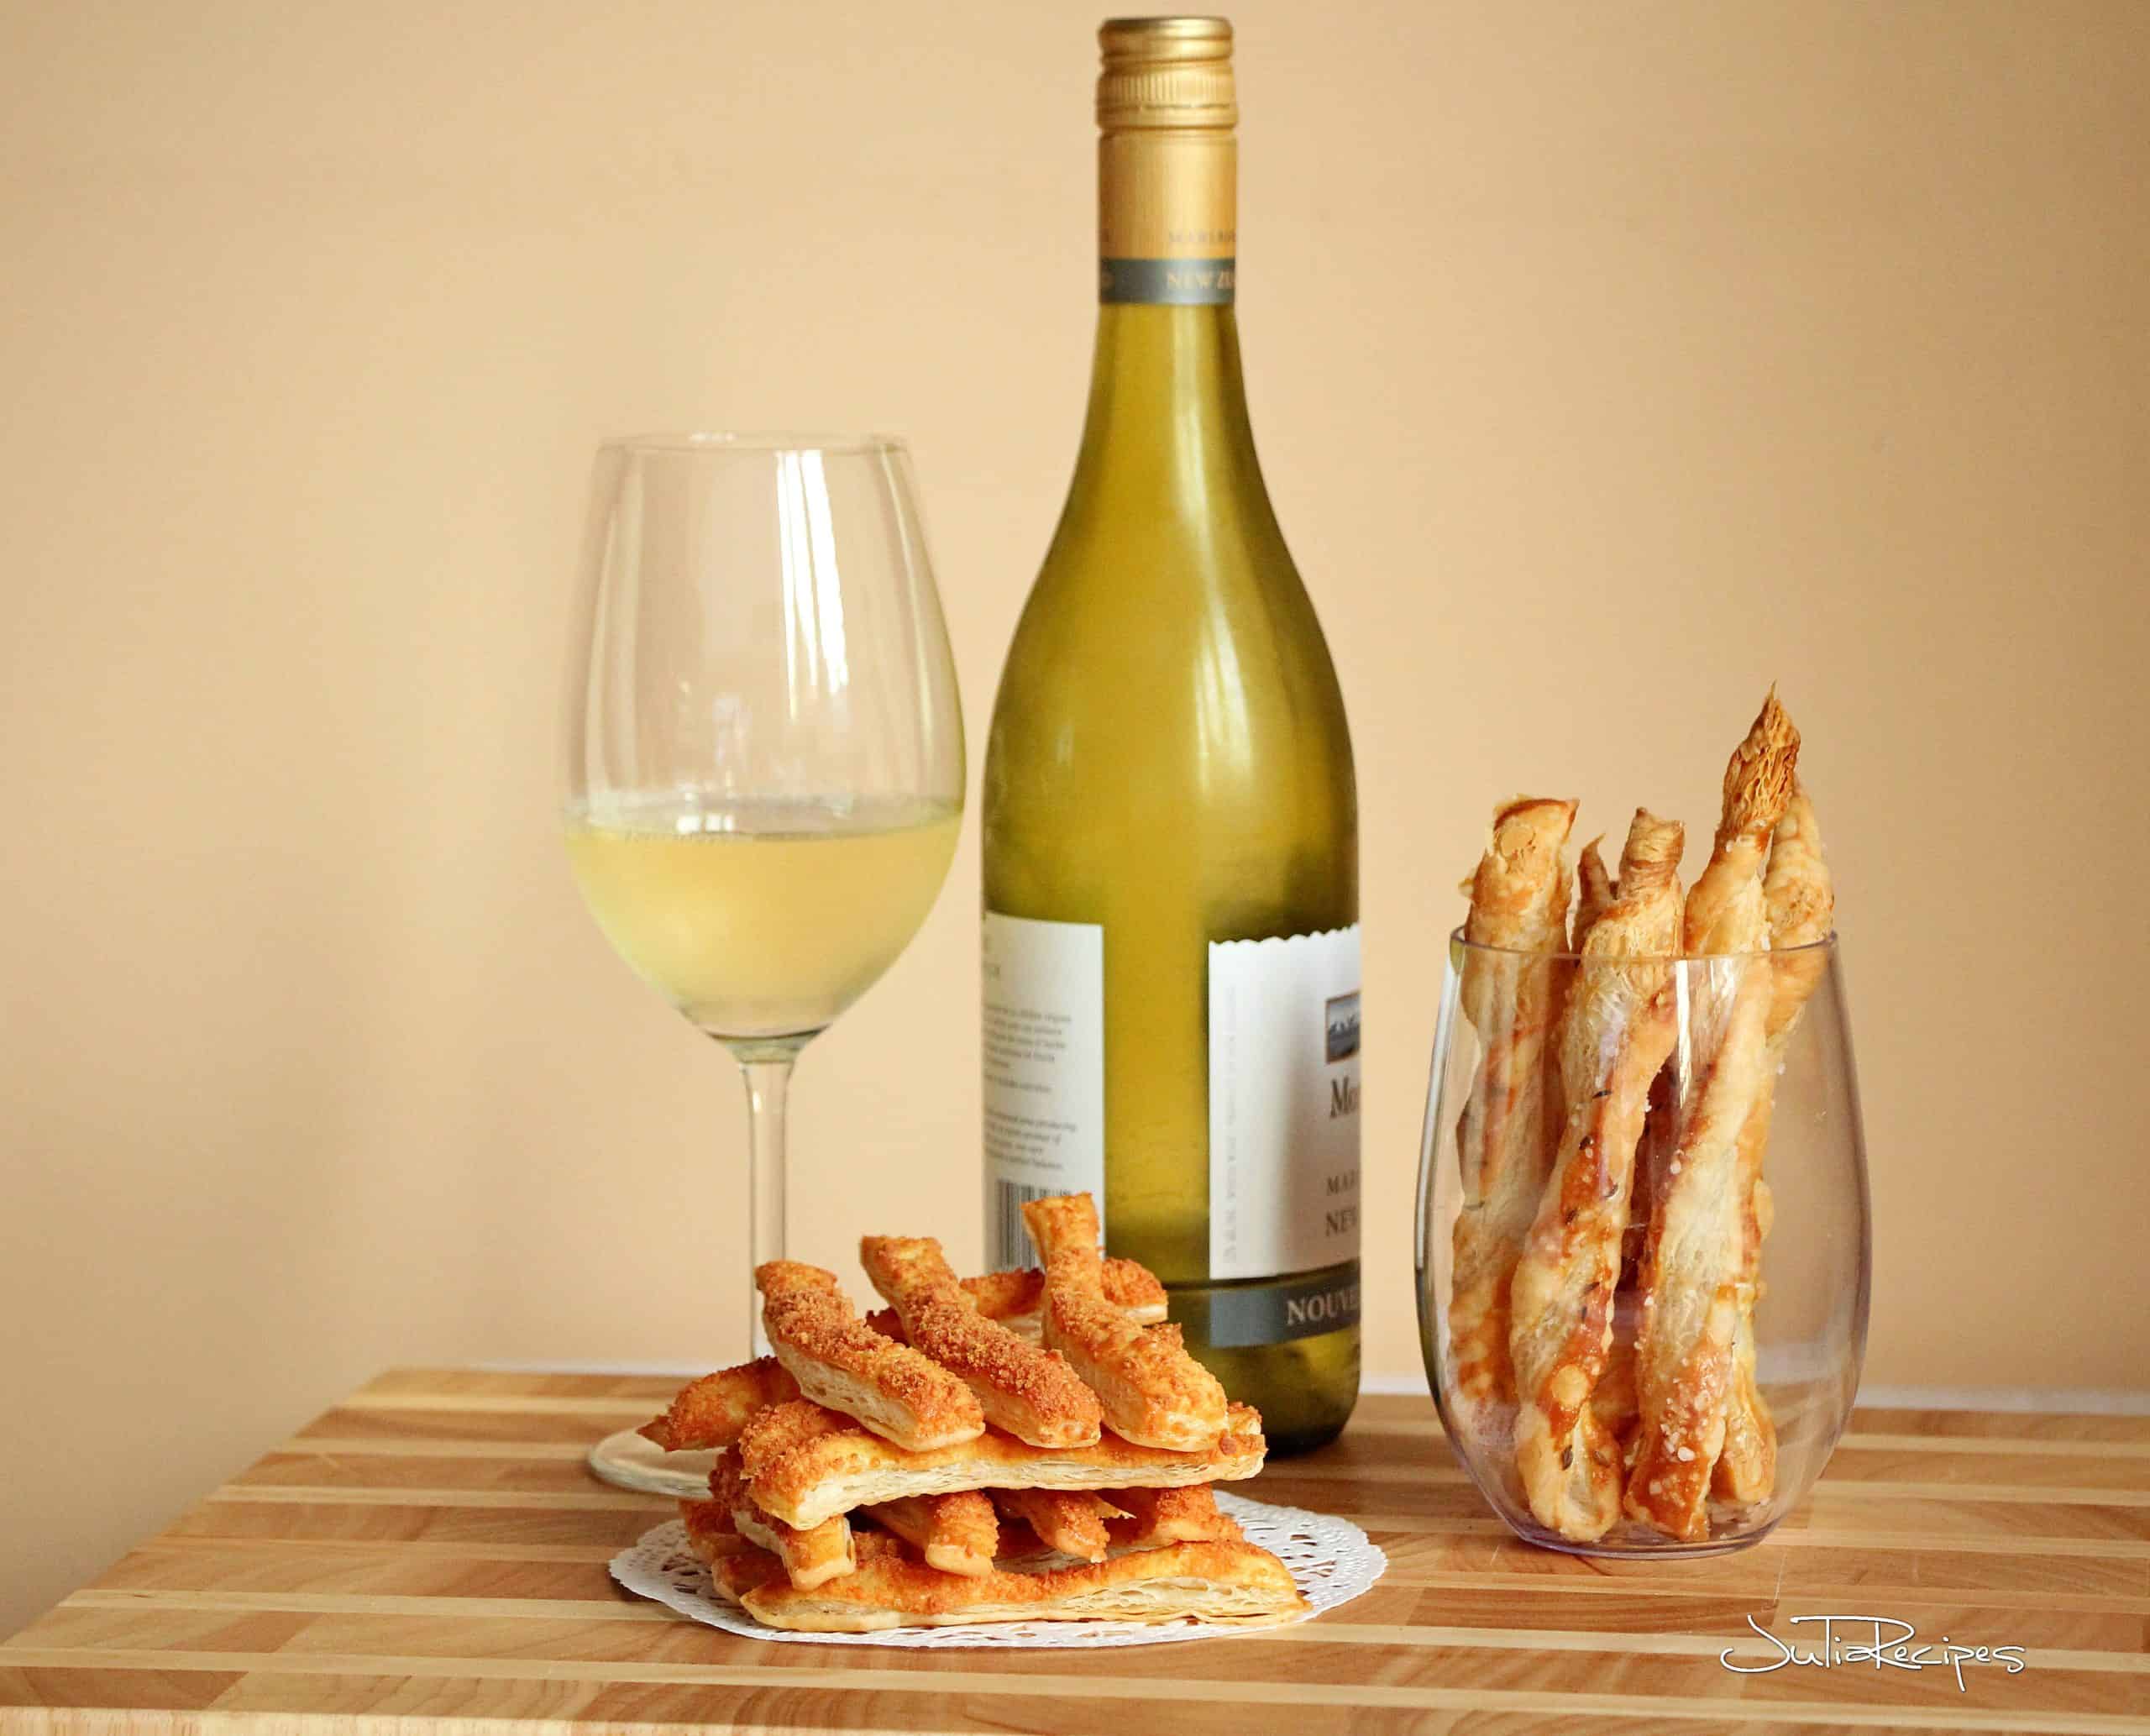 parmesan sticks from puff pastry in wine glass. In background white wine in glass and in bottle.